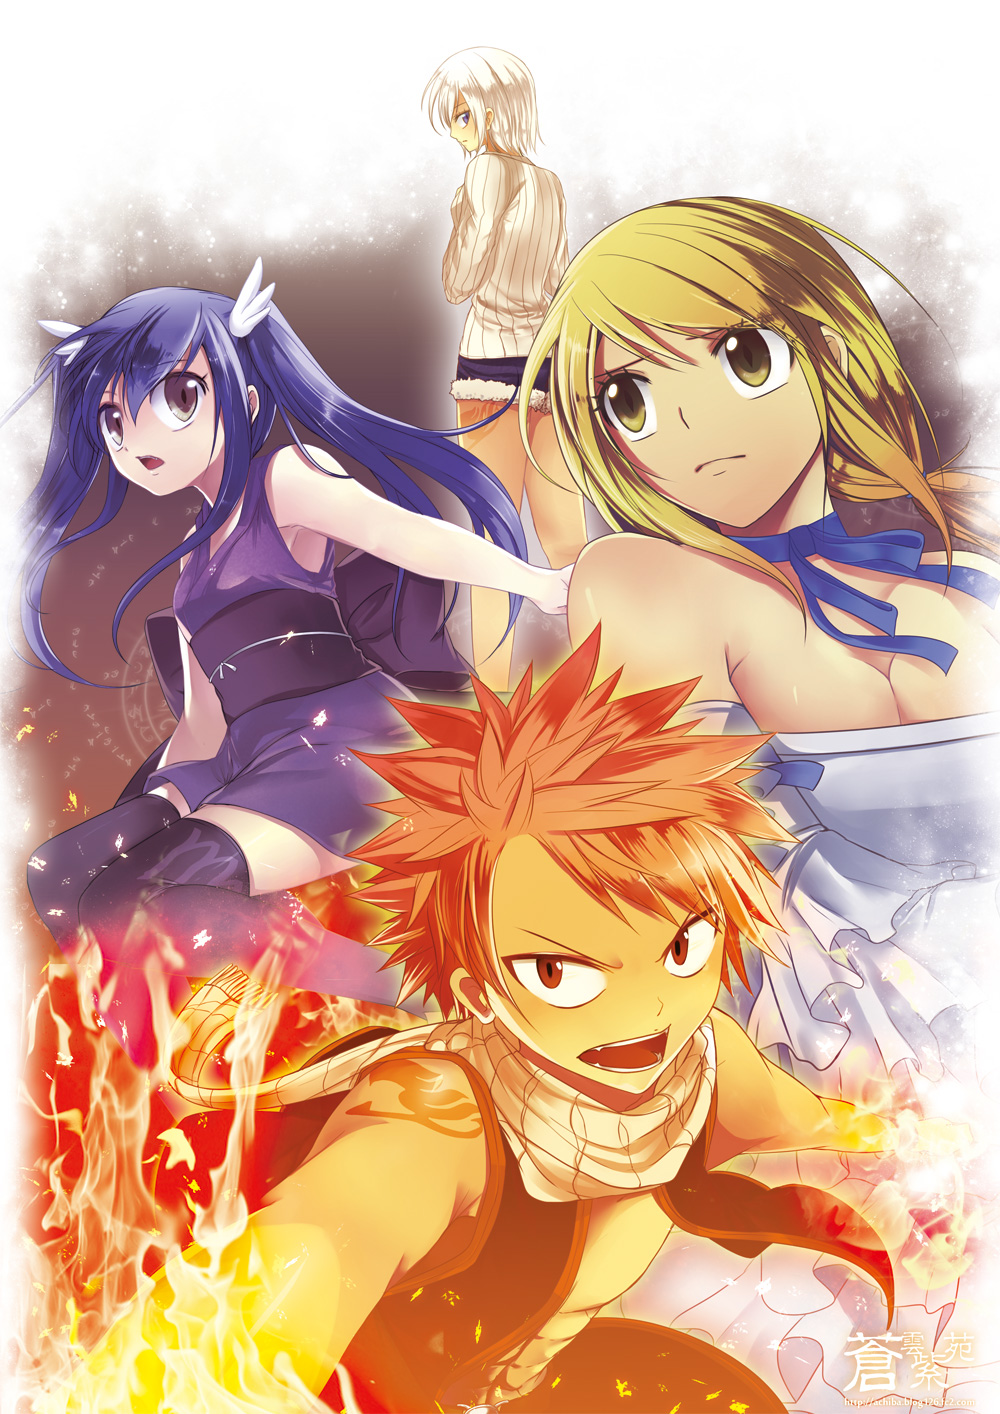 bare_shoulders blonde_hair blue_hair breasts choker cleavage cutoffs fairy_tail fire highres japanese_clothes kimono lisanna lucy_heartfilia natsu_dragneel obi red_hair redhead scarf short_kimono silver_hair thigh-highs thighhighs twintails wendy_marvell